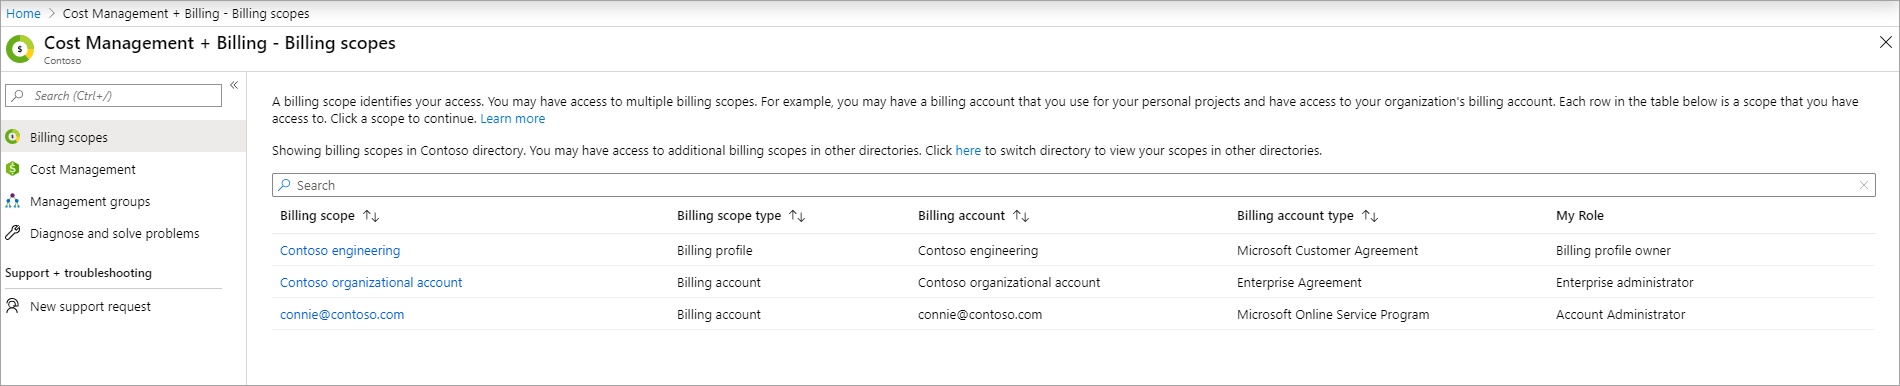 View Your Billing Accounts In Azure Portal Microsoft Cost Management